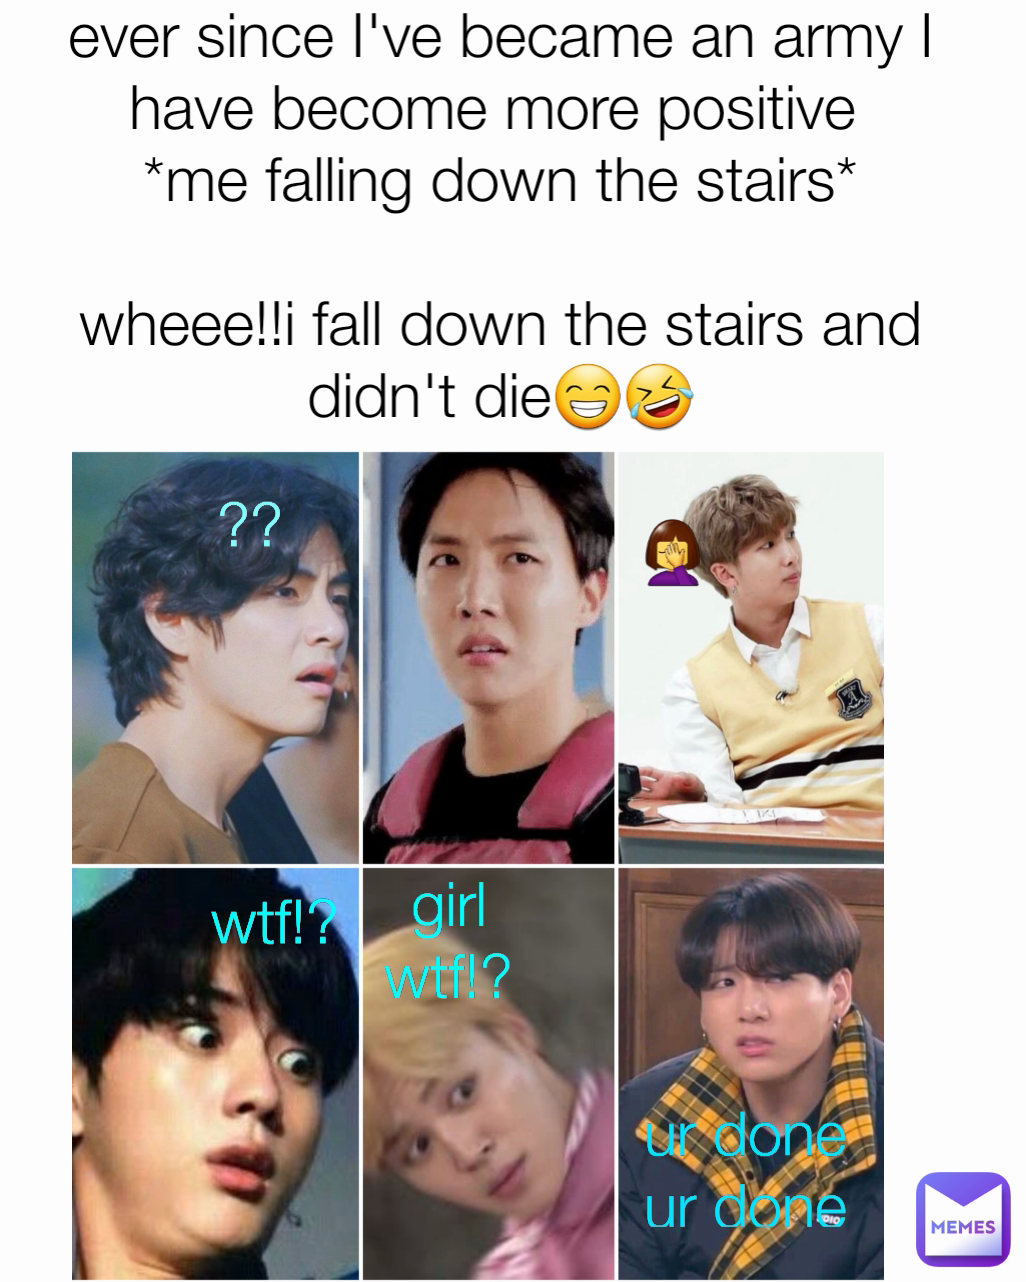 wtf!? 🤦‍♀️ girl wtf!? ever since I've became an army I have become more positive 
*me falling down the stairs*

wheee!!i fall down the stairs and didn't die😁🤣 ?? ur done ur done